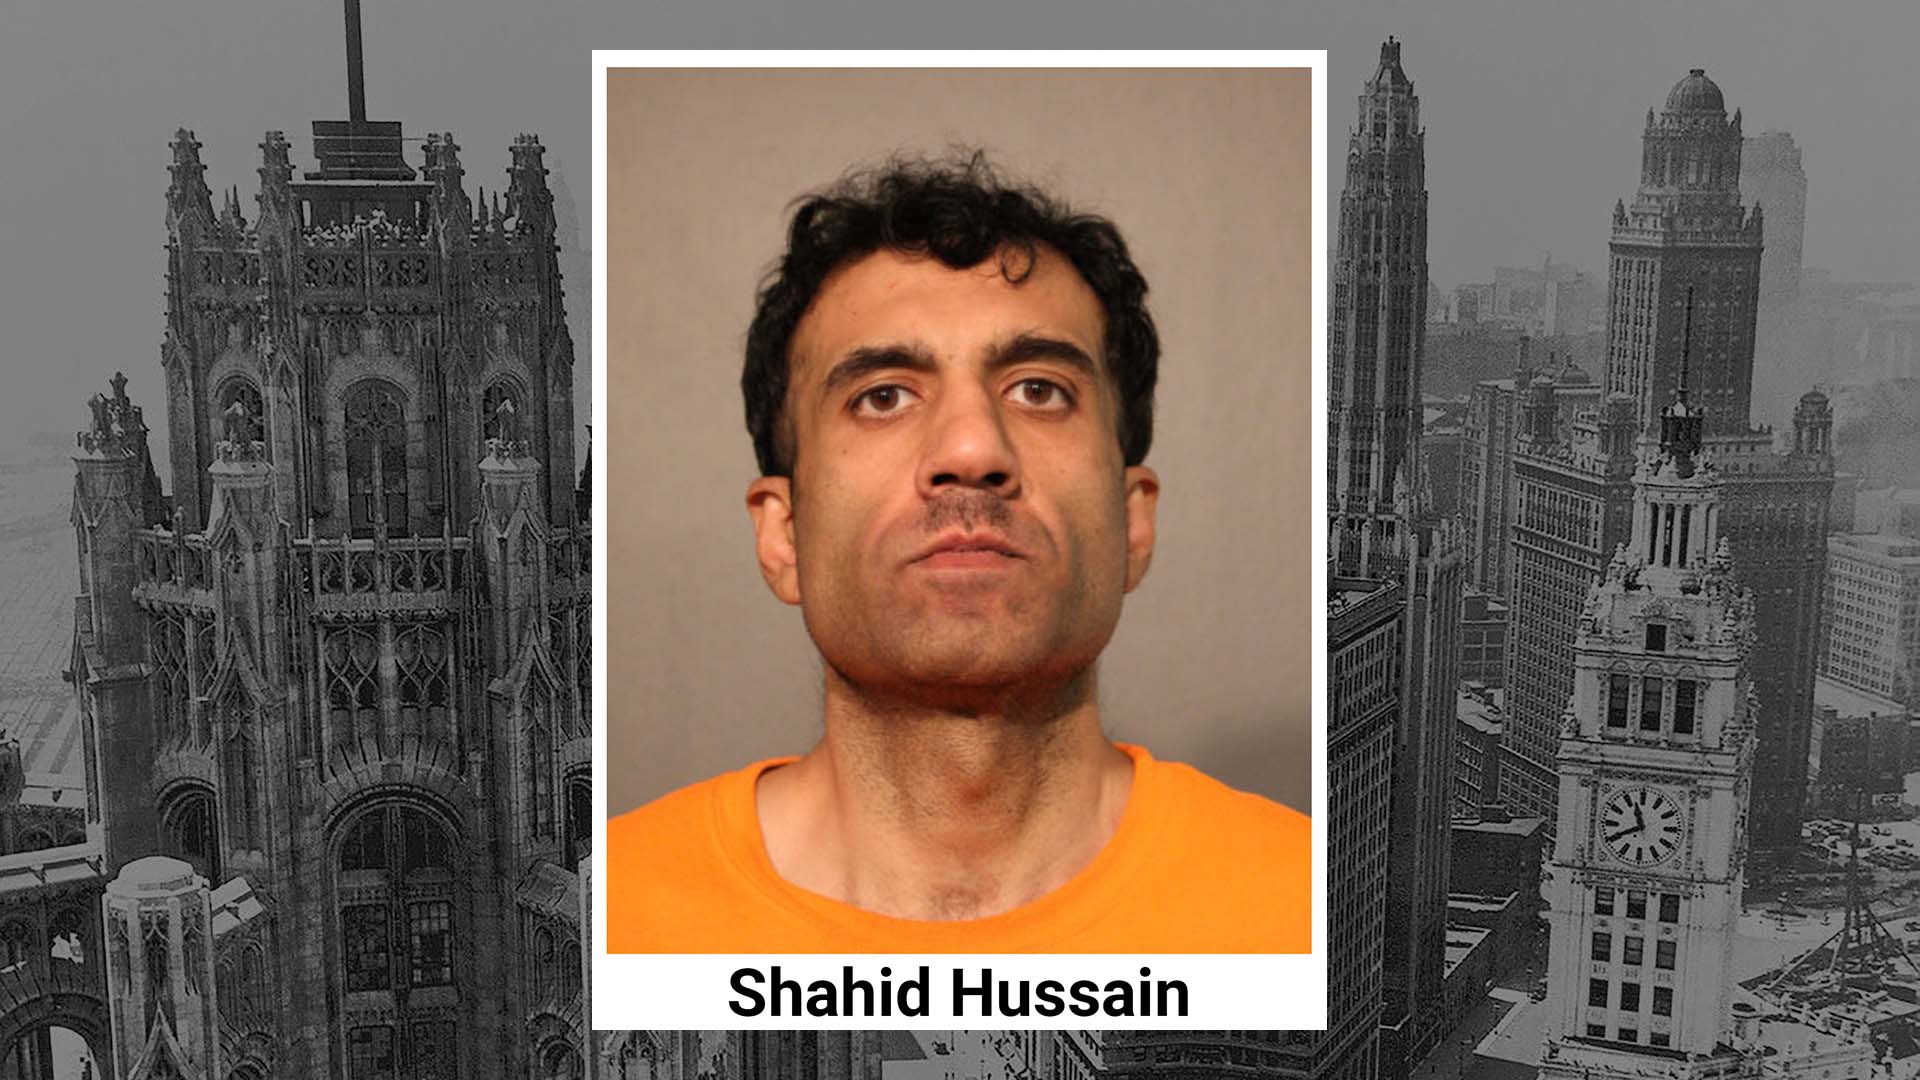 Suburban Niles man charged with multiple felony hate crimes targeting Jewish Synagogue and school